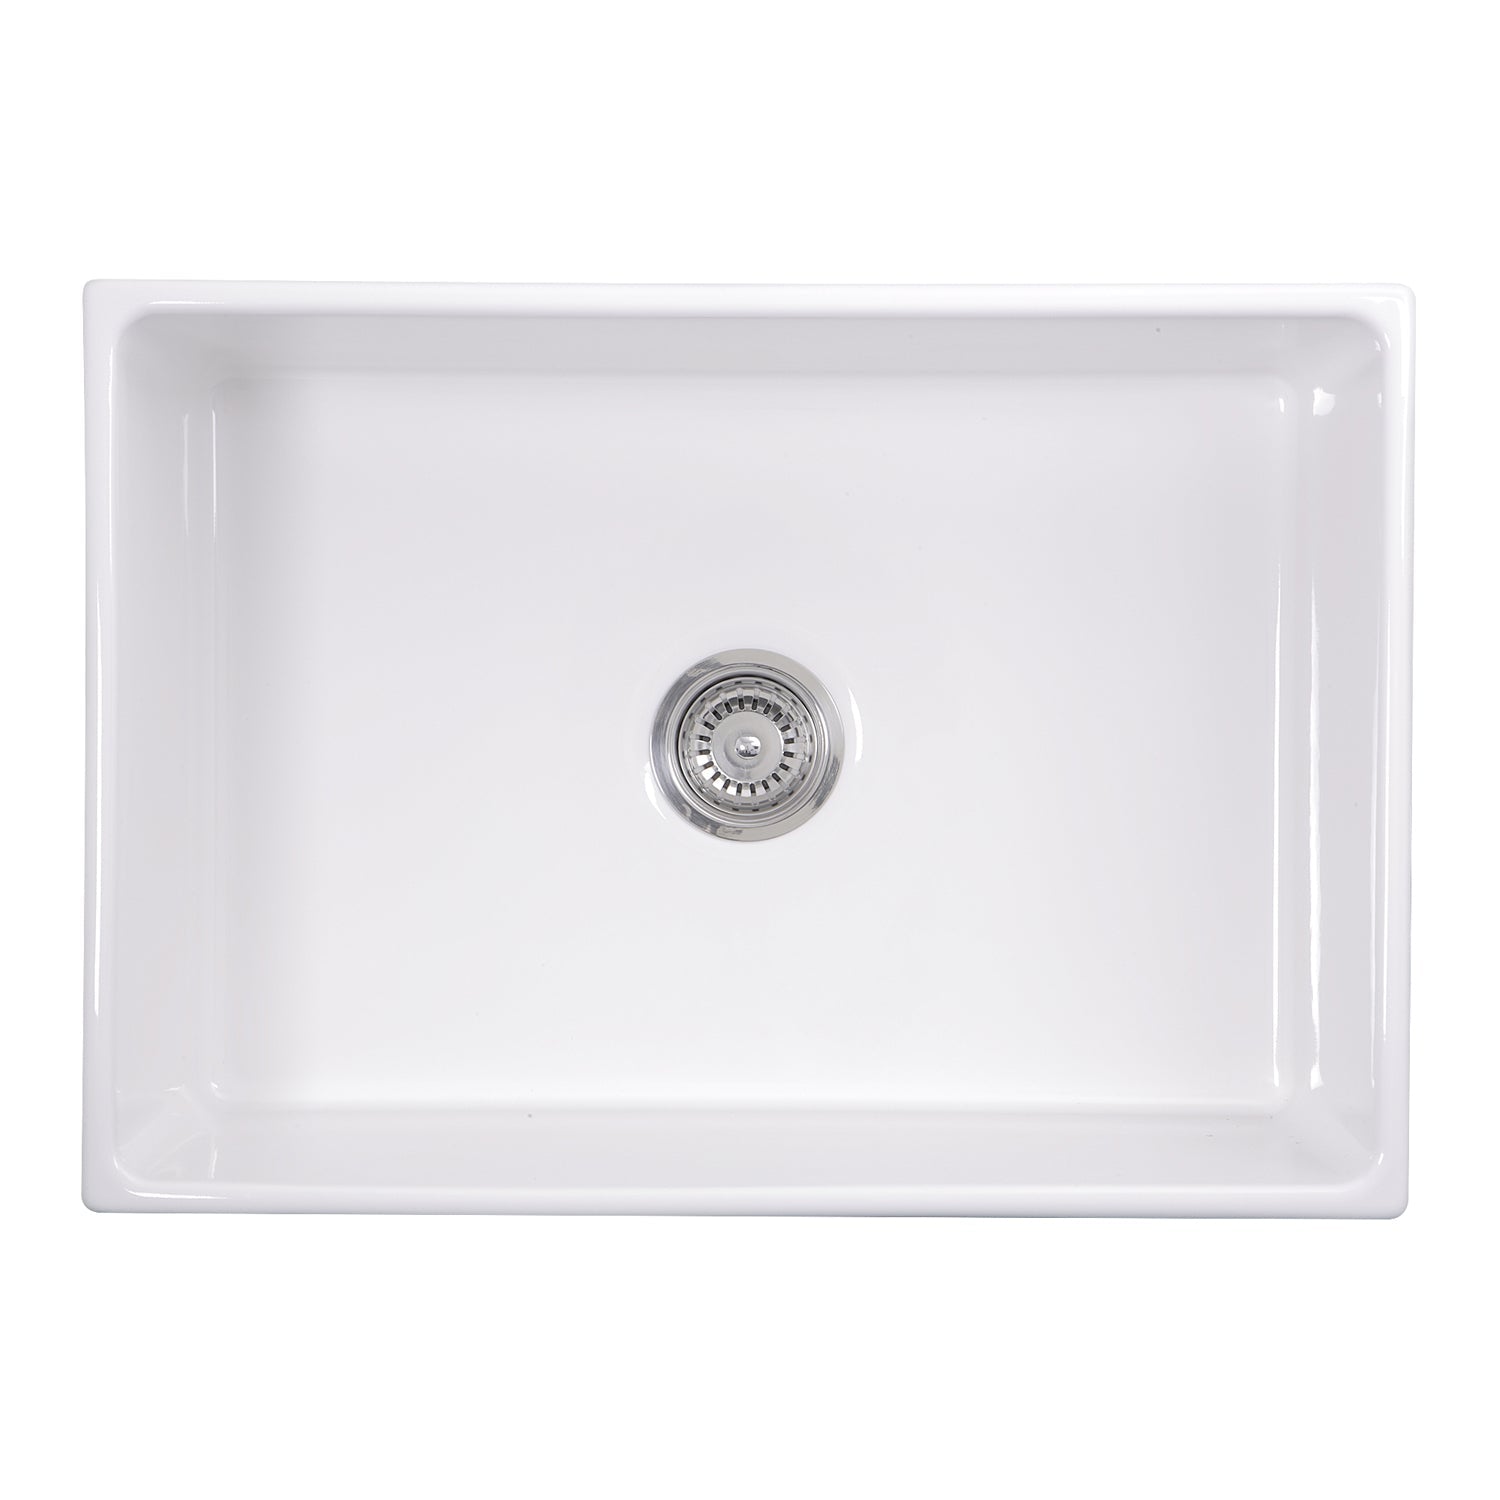 Nantucket Sinks 27" Farmhouse Fireclay Sink with Drain and Grid